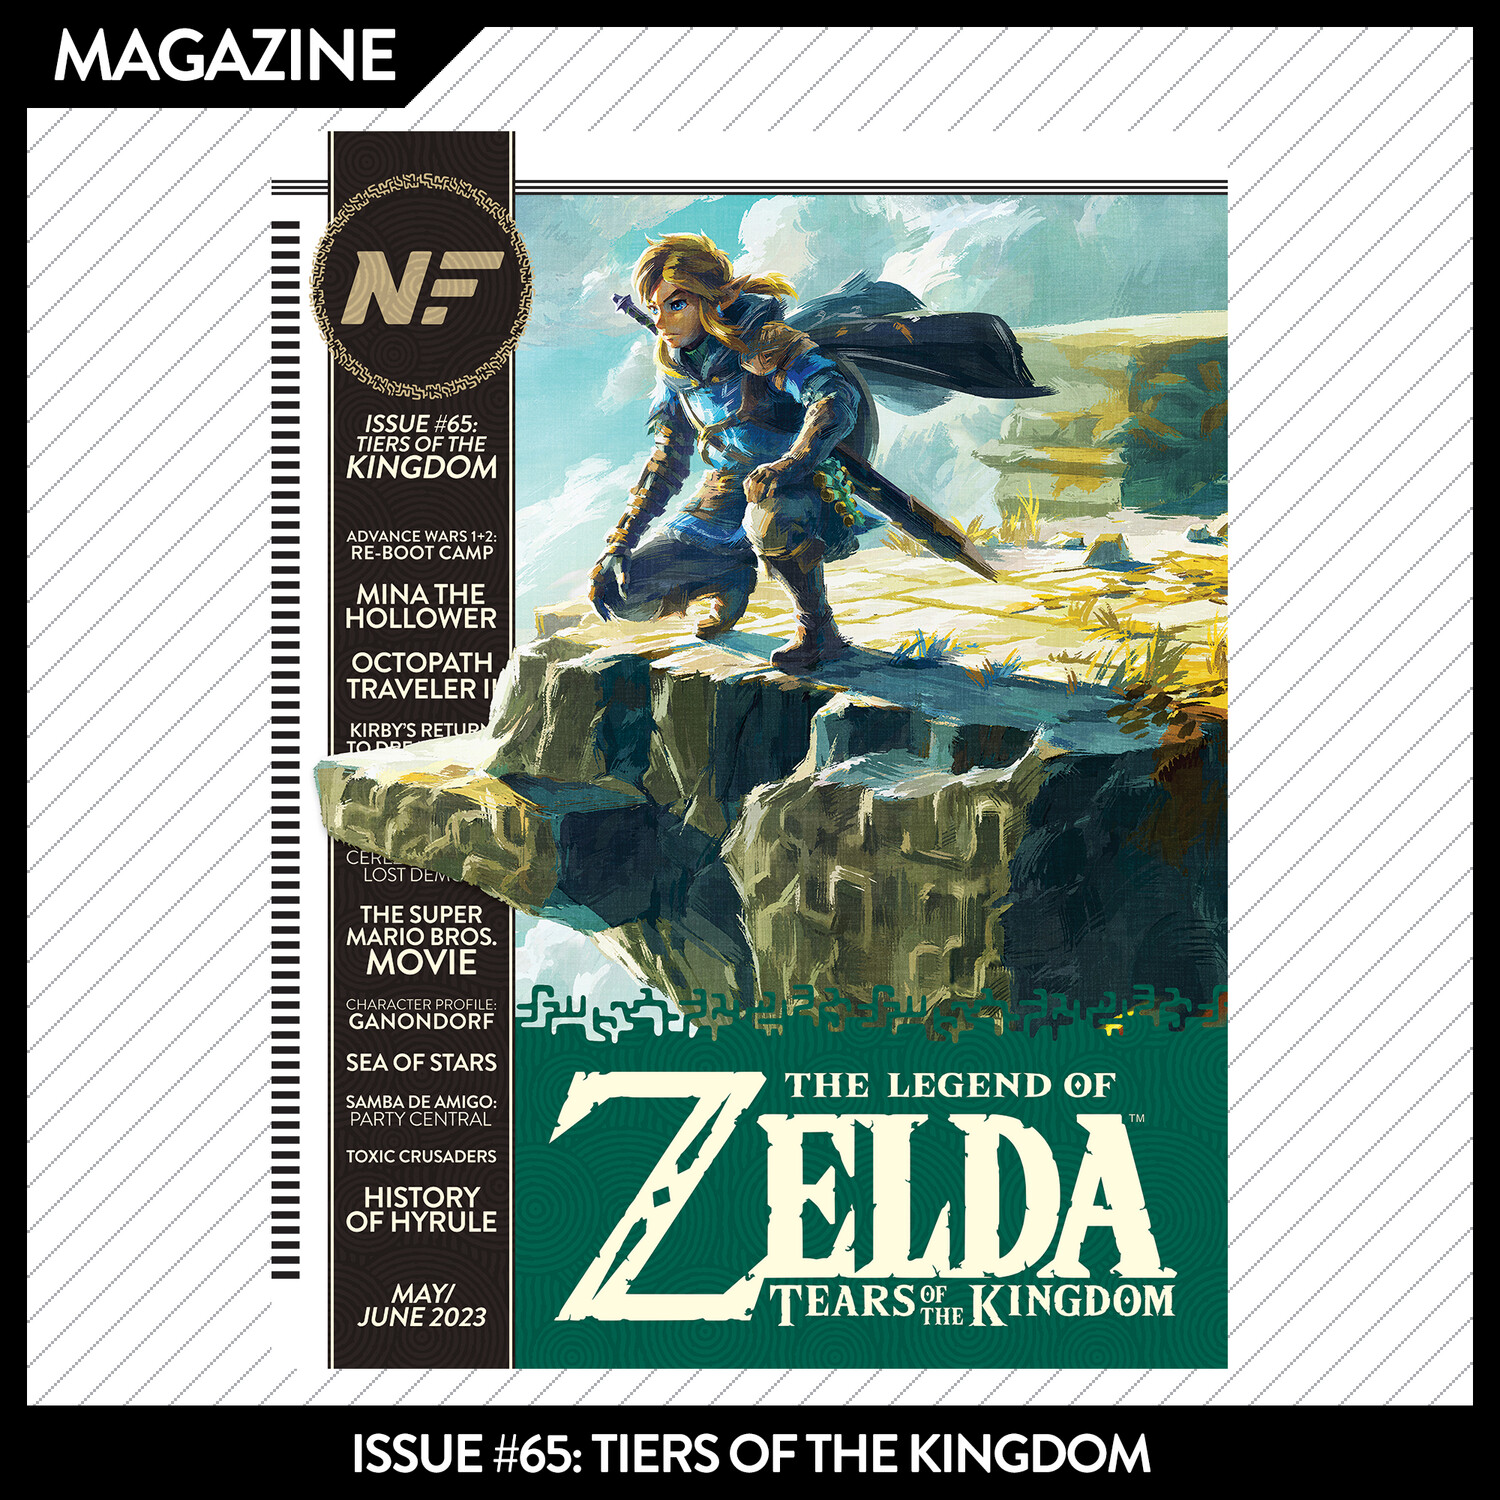 Issue #65: Tiers of the Kingdom – May/June 2023